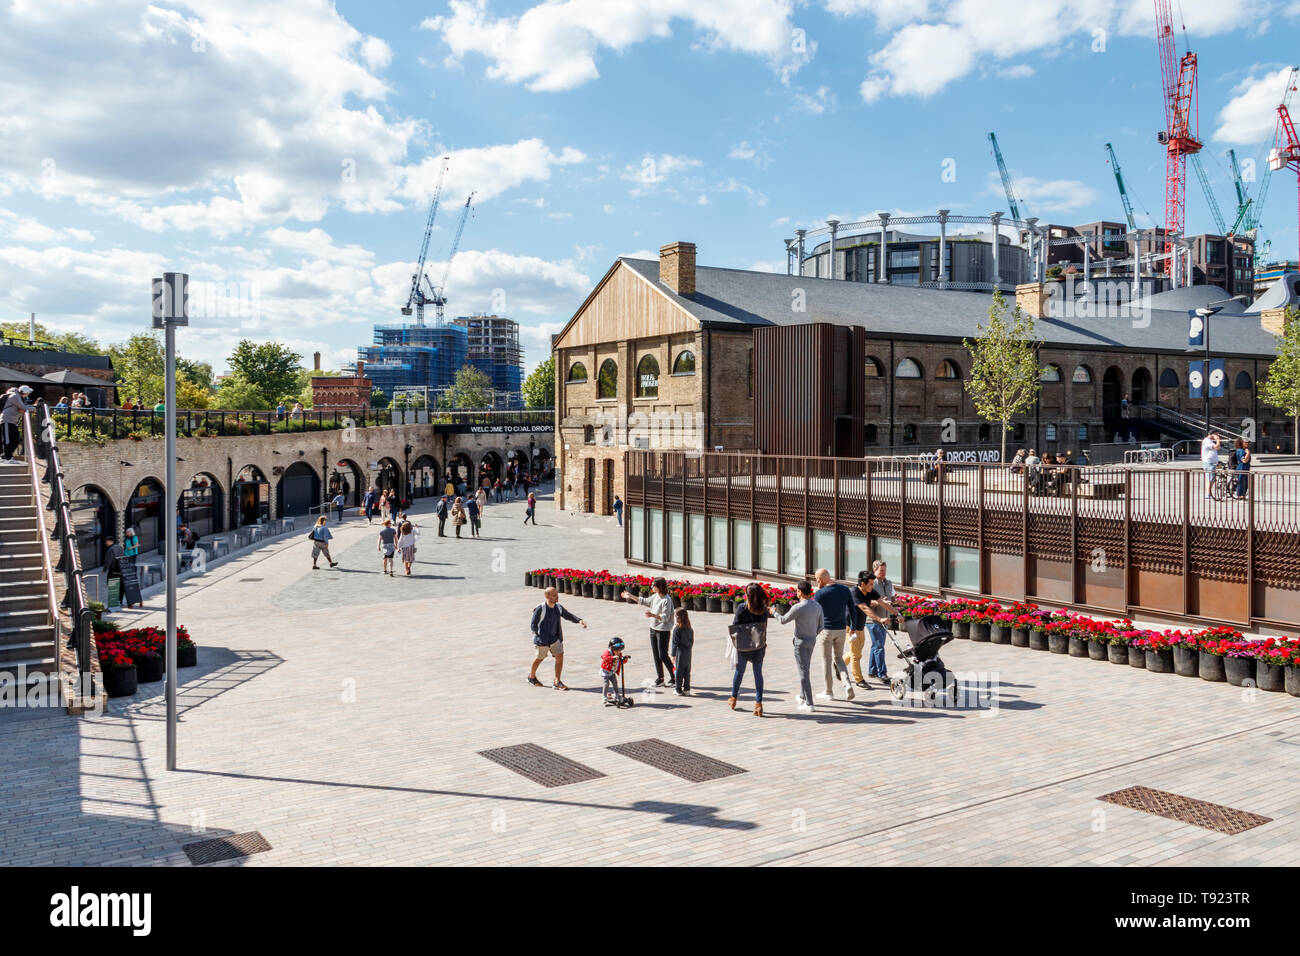 The recently opened public space at Coal Drops Yard, King's Cross, London, UK, 2019 Stock Photo